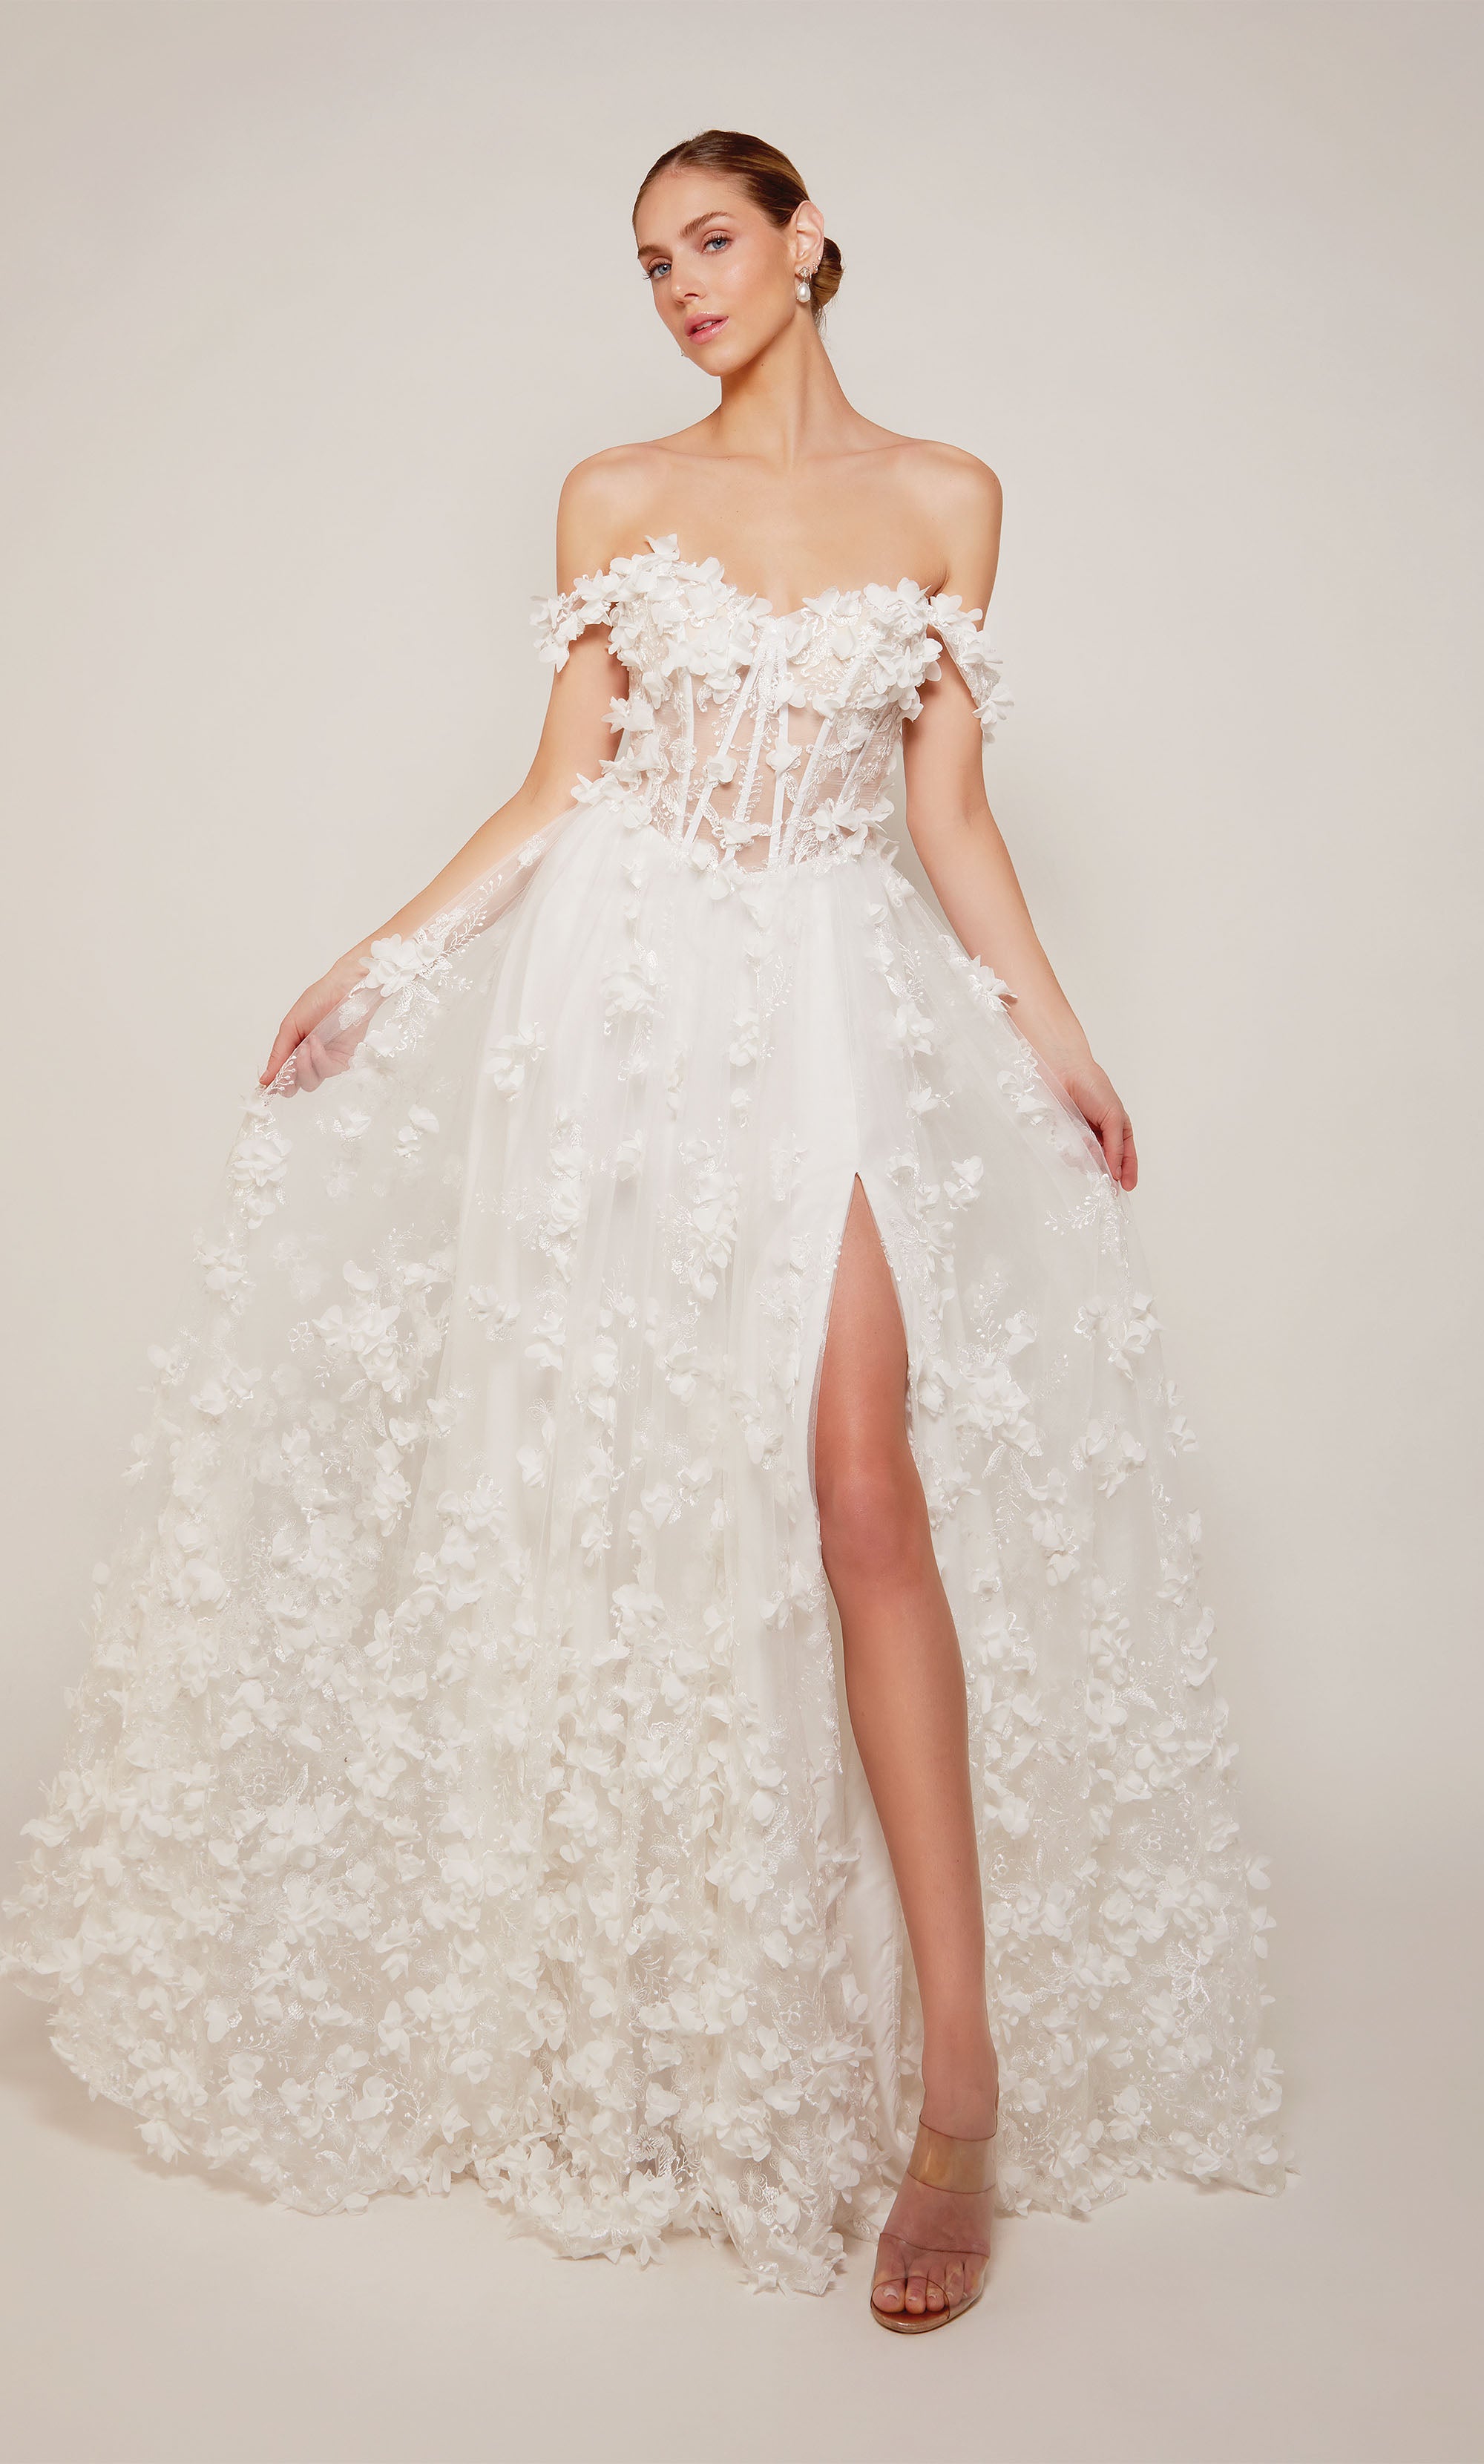 How to lace up your corset wedding dress?